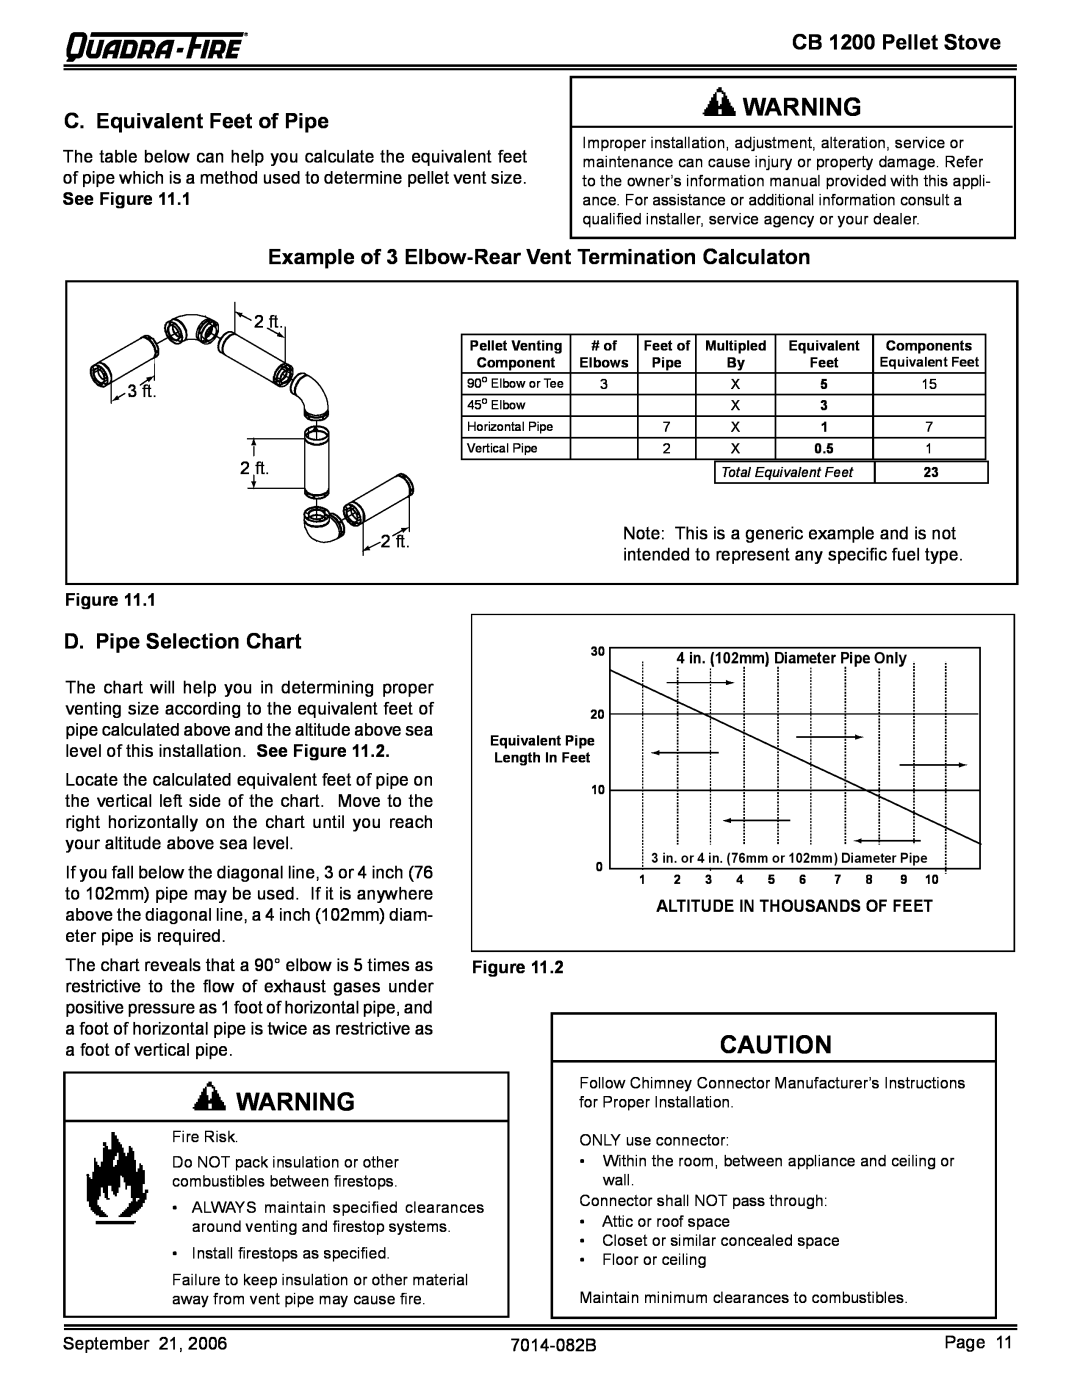 Quadra-Fire CB1200 owner manual C. Equivalent Feet of Pipe, D. Pipe Selection Chart, CB 1200 Pellet Stove, See Figure 